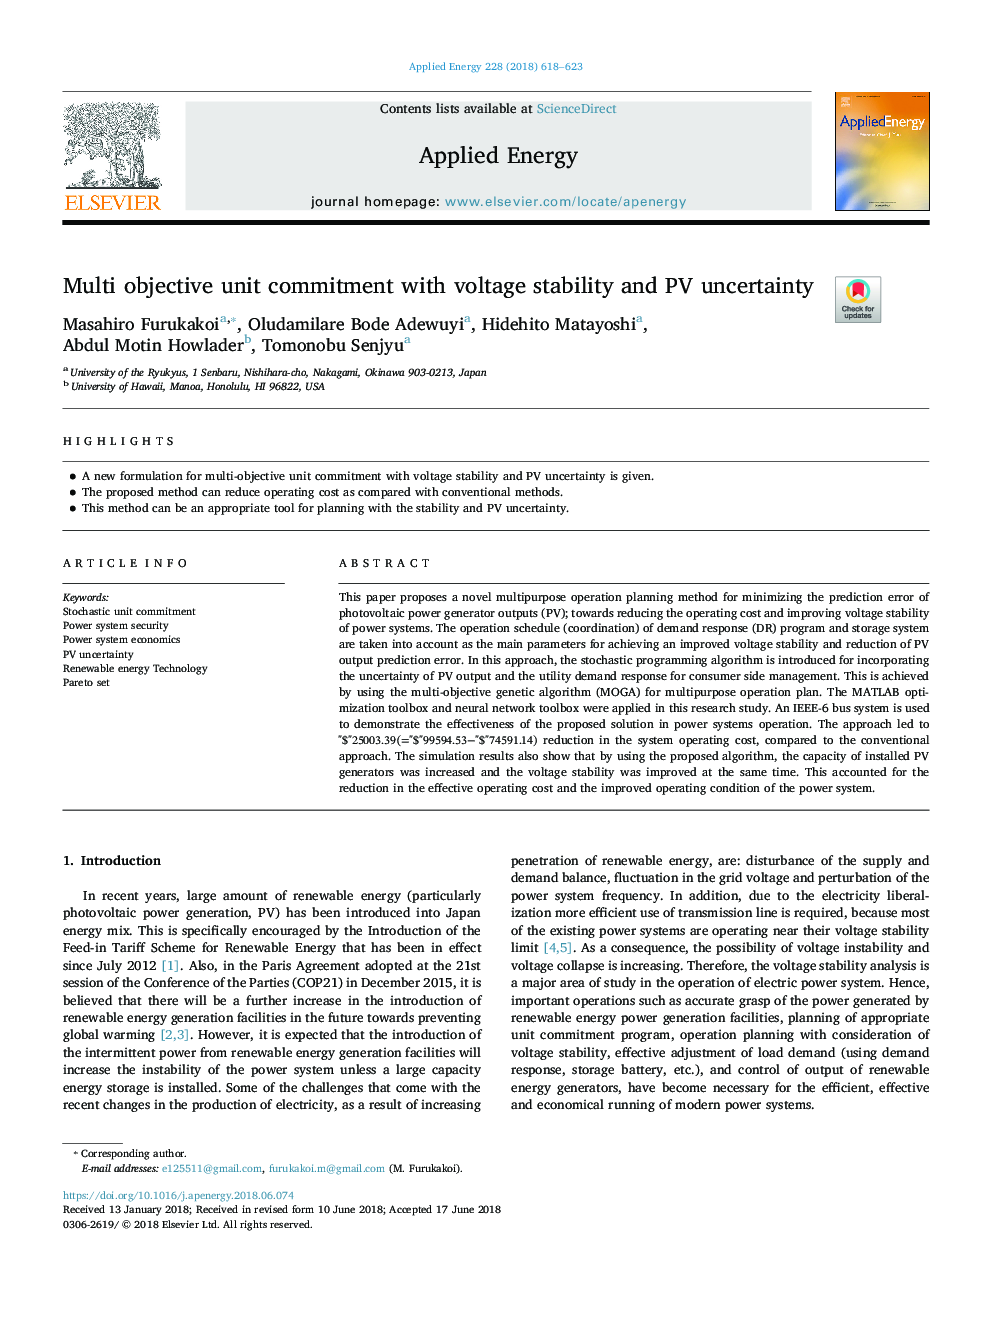 Multi objective unit commitment with voltage stability and PV uncertainty